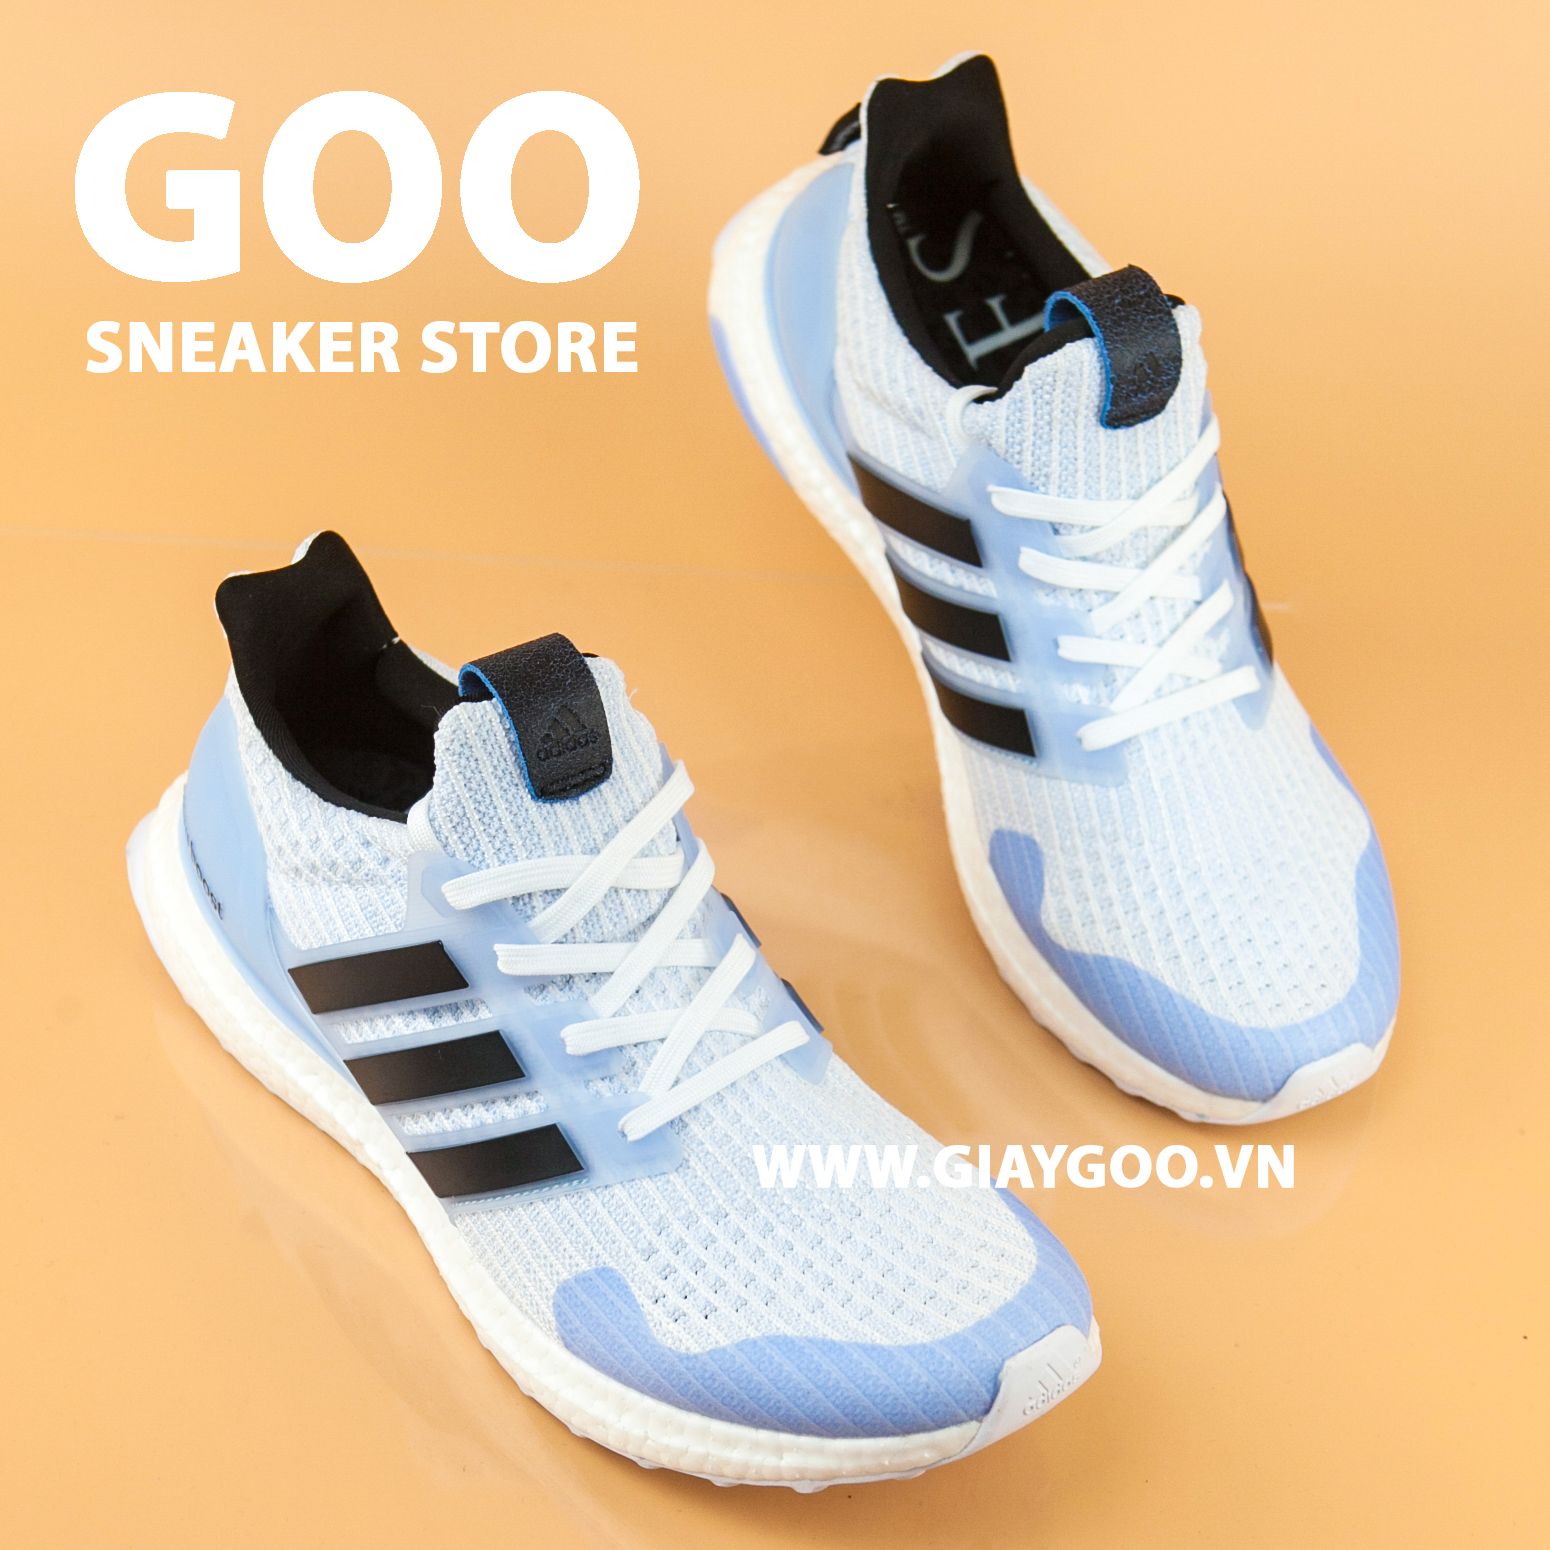  Giày Ultra Boost 4.0 Game Of Thrones White Walker REP 1:1 